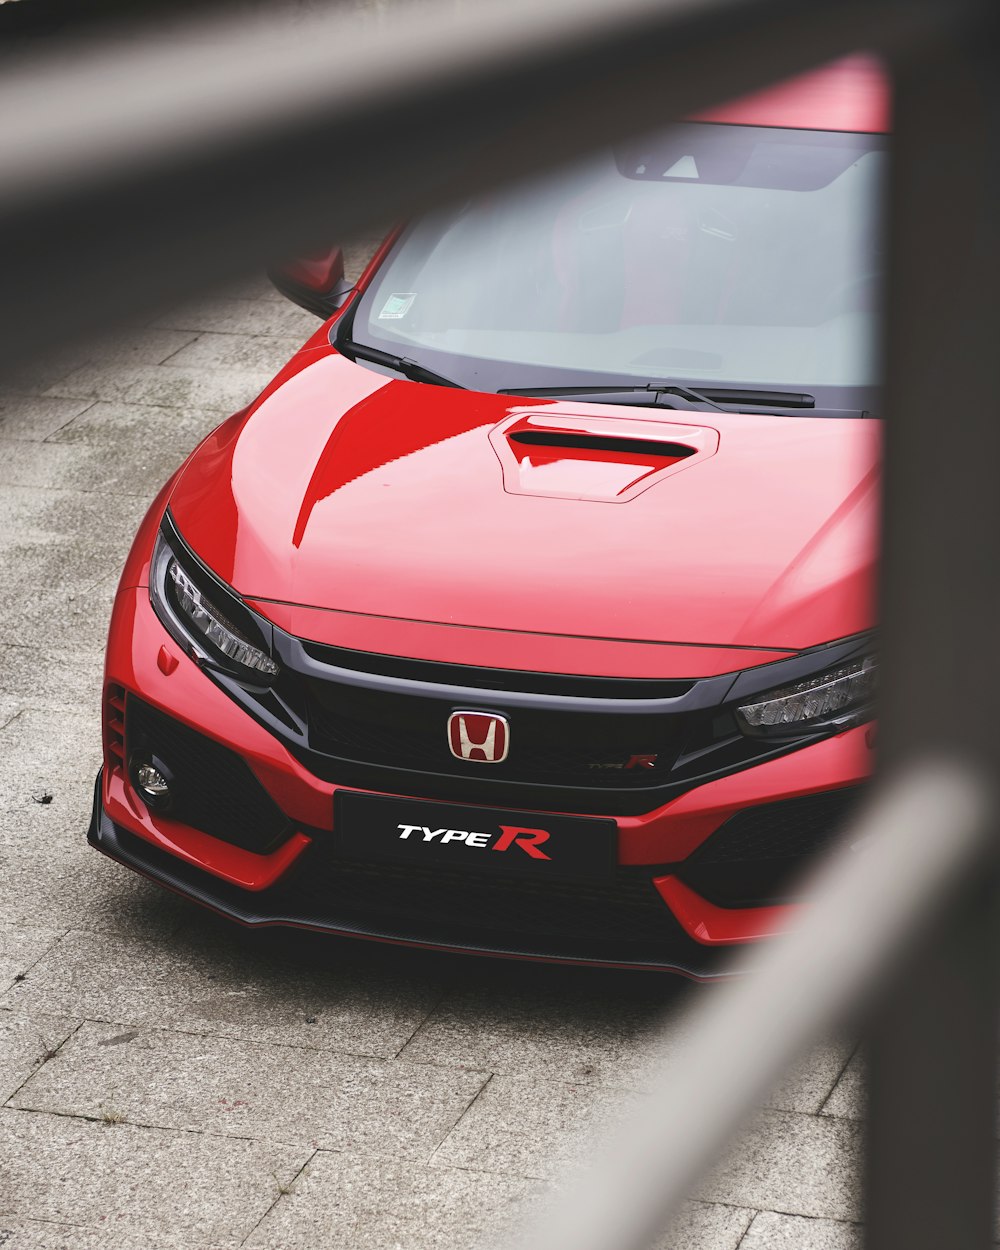 Honda Civic Type R Pictures | Download Free Images on Unsplash